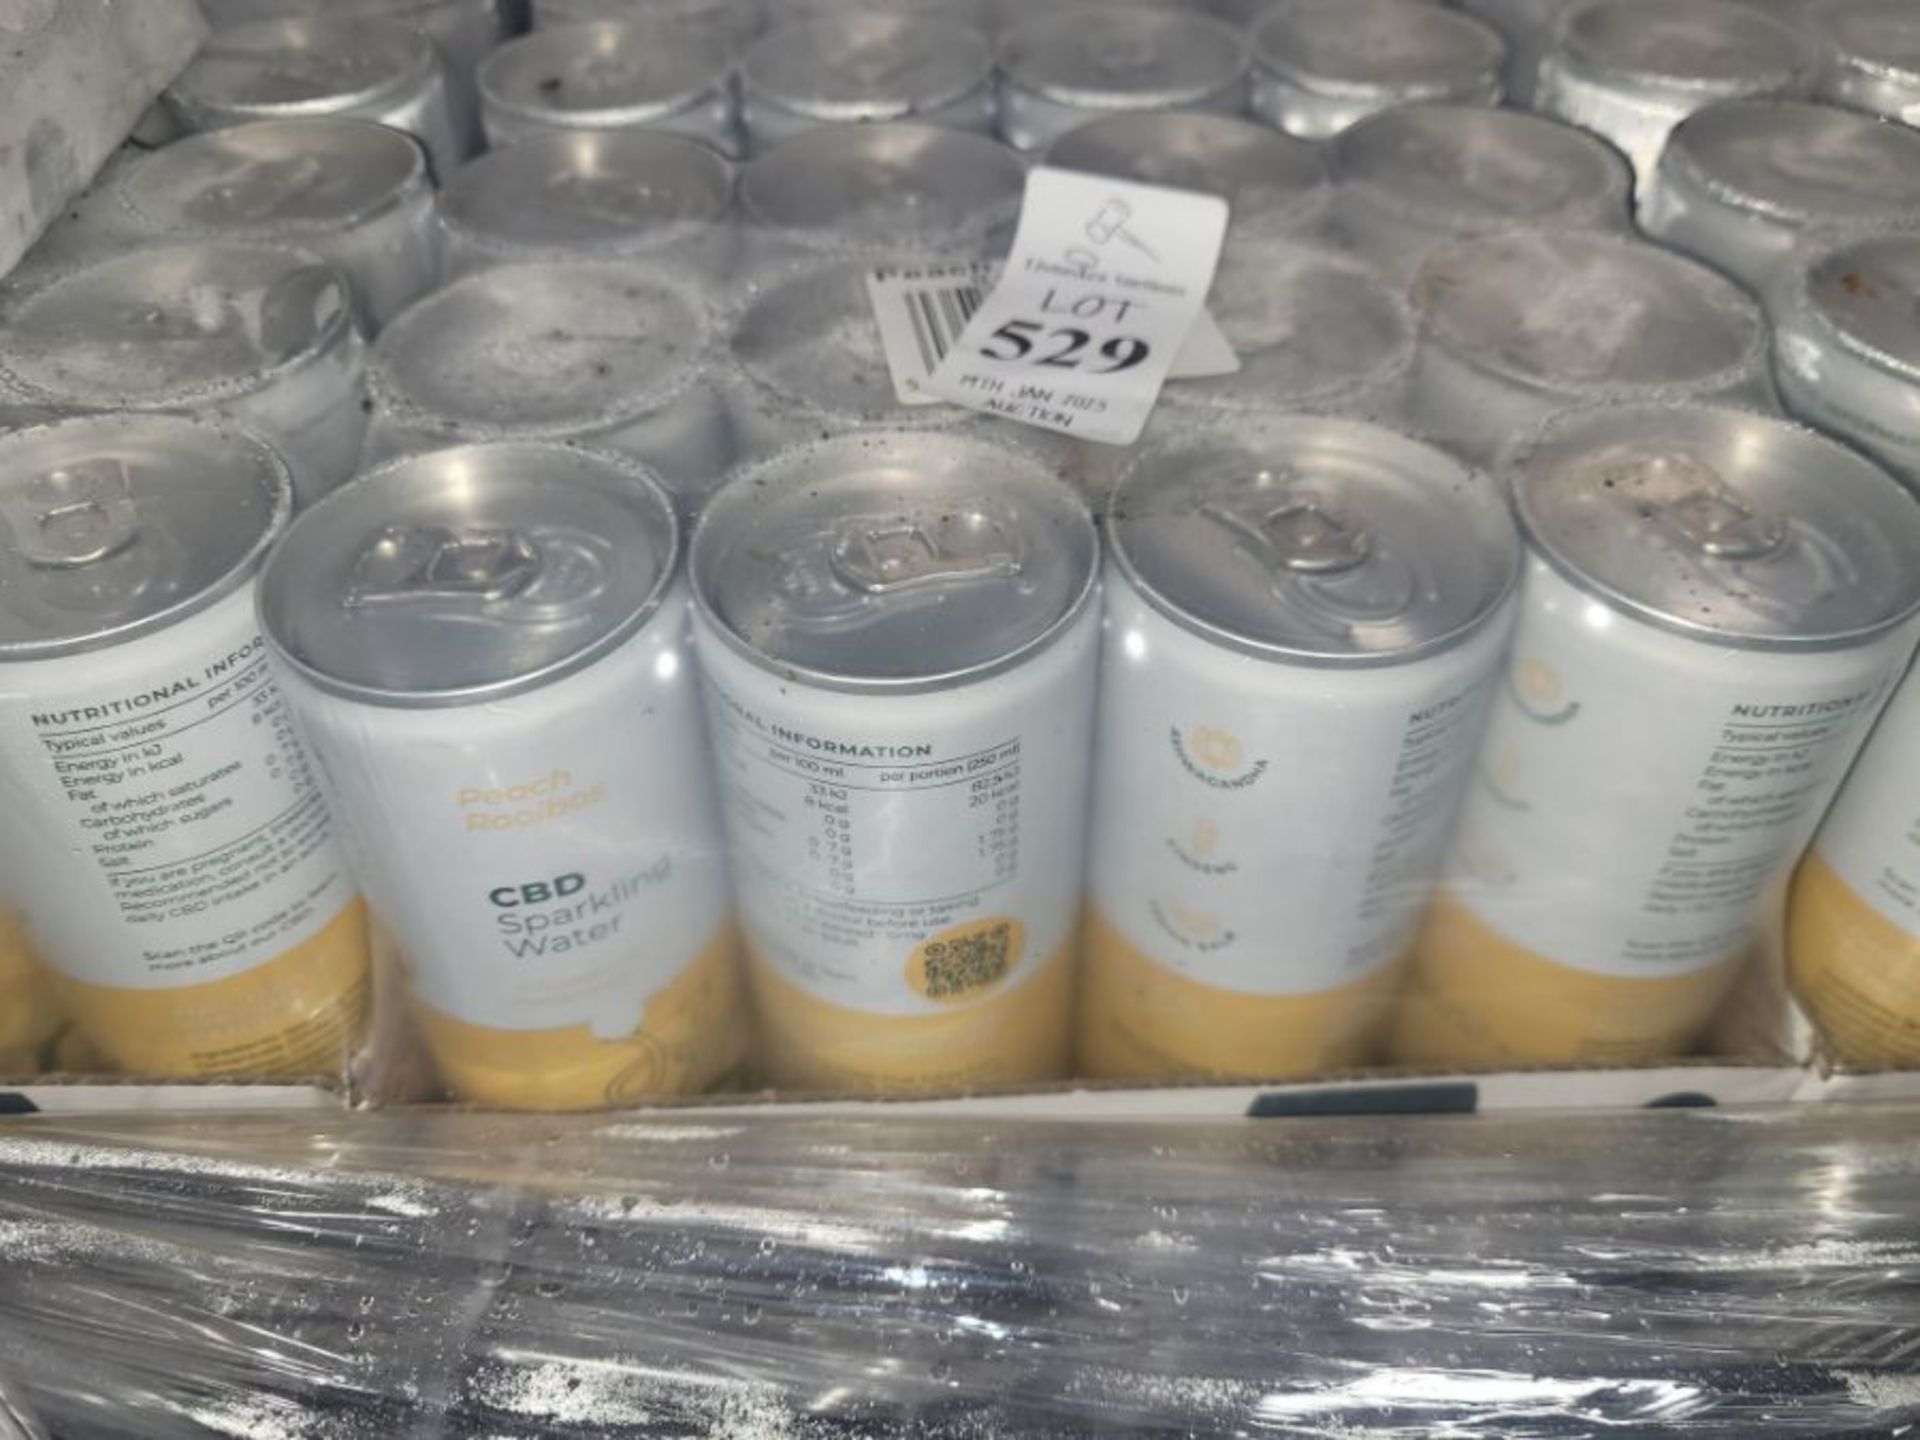 5X CASE OF 12 THREE DOTS GRAPEFRUIT CBD SPARKING WATER (60 CANS) O.O.D.